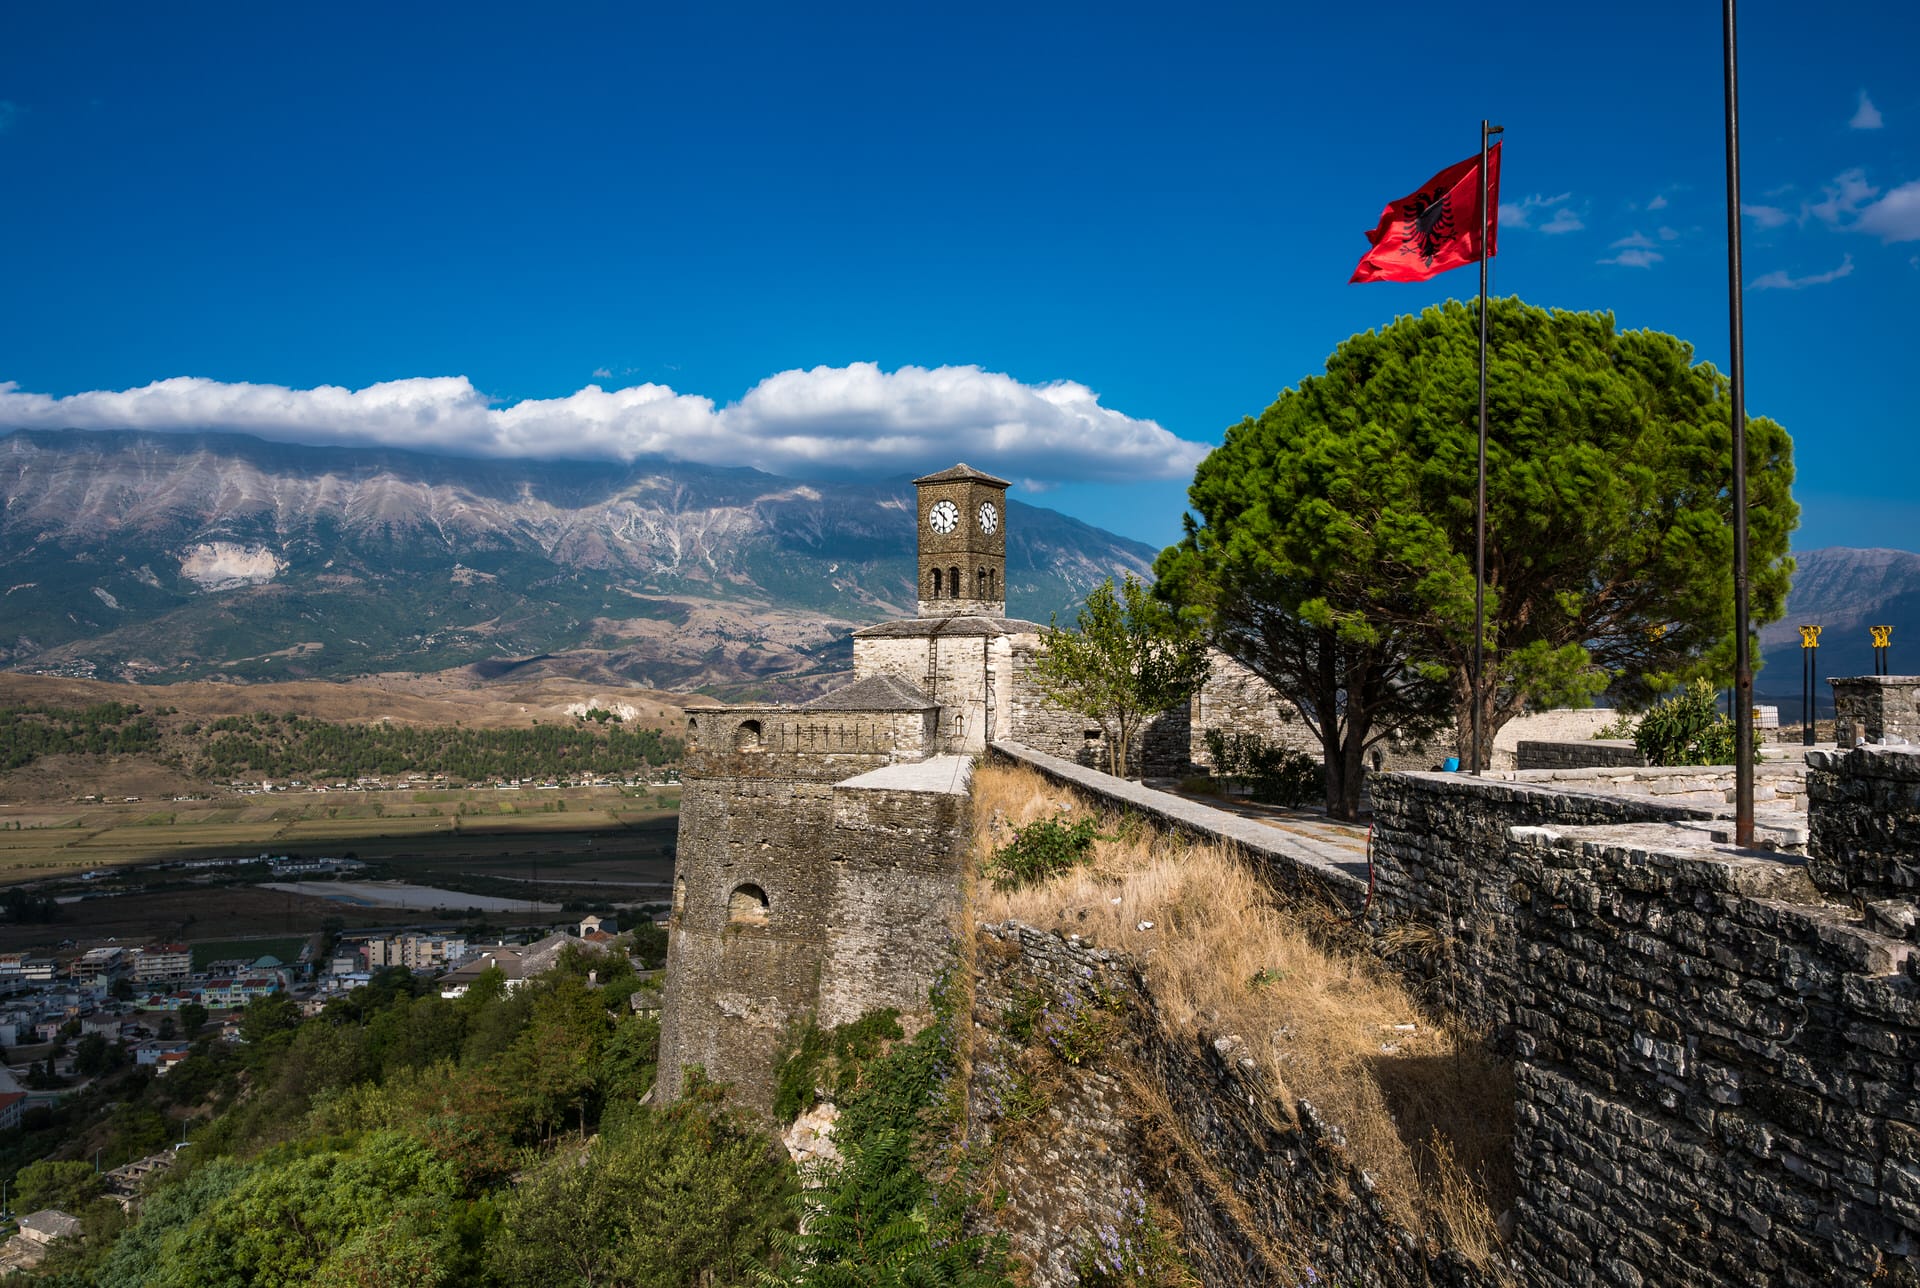 Gjirokaster Citadel, a well-preserved castle and UNESCO World Heritage site